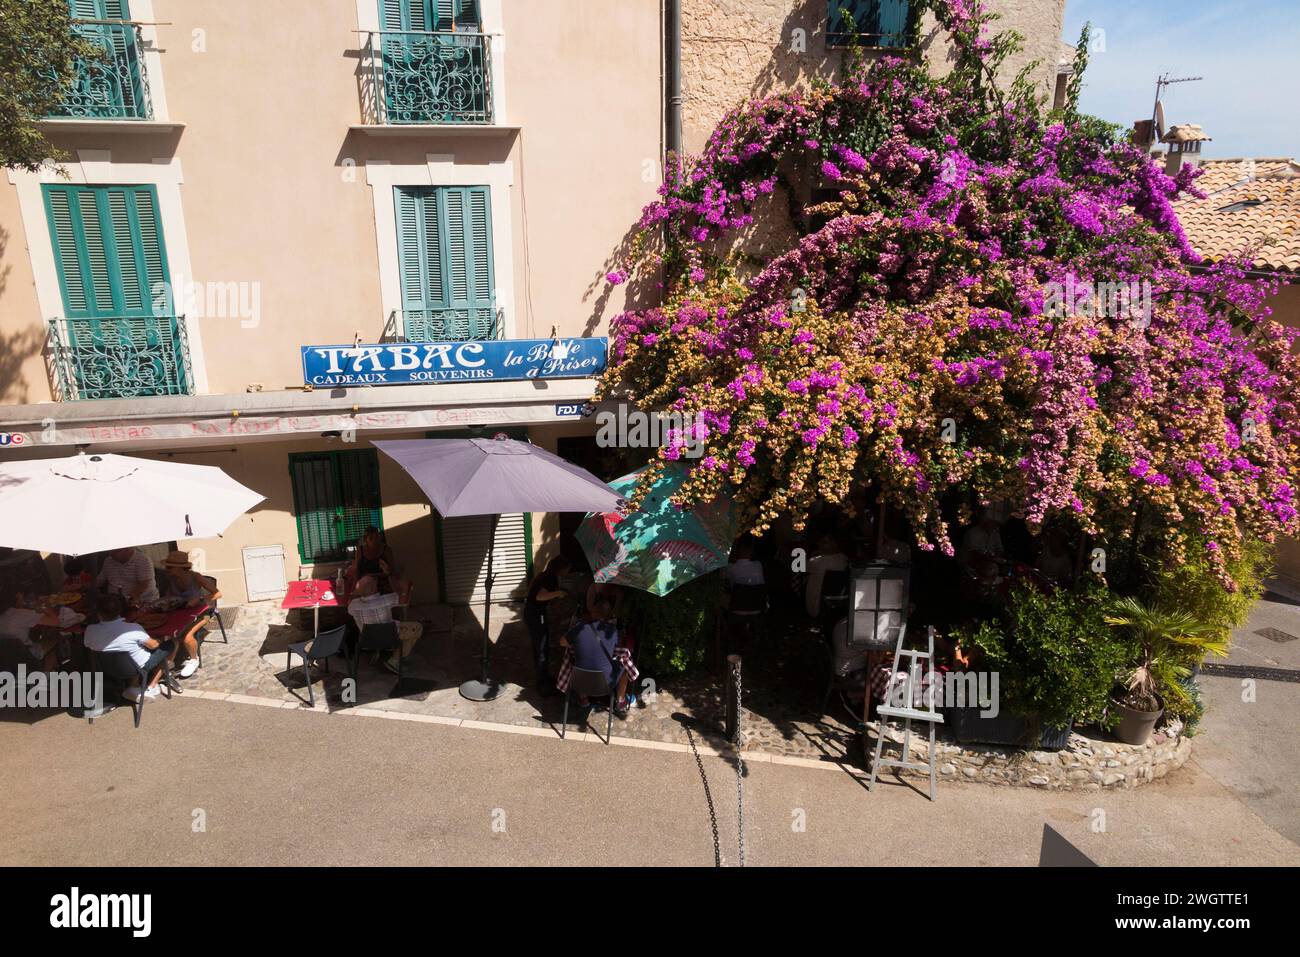 Bureau de tabac with flowering bougainvillea covering walls, in old village of Haut-de-Cagnes, Cagnes-sur-Mer, French Riviera town near Nice. France. (135) Stock Photo